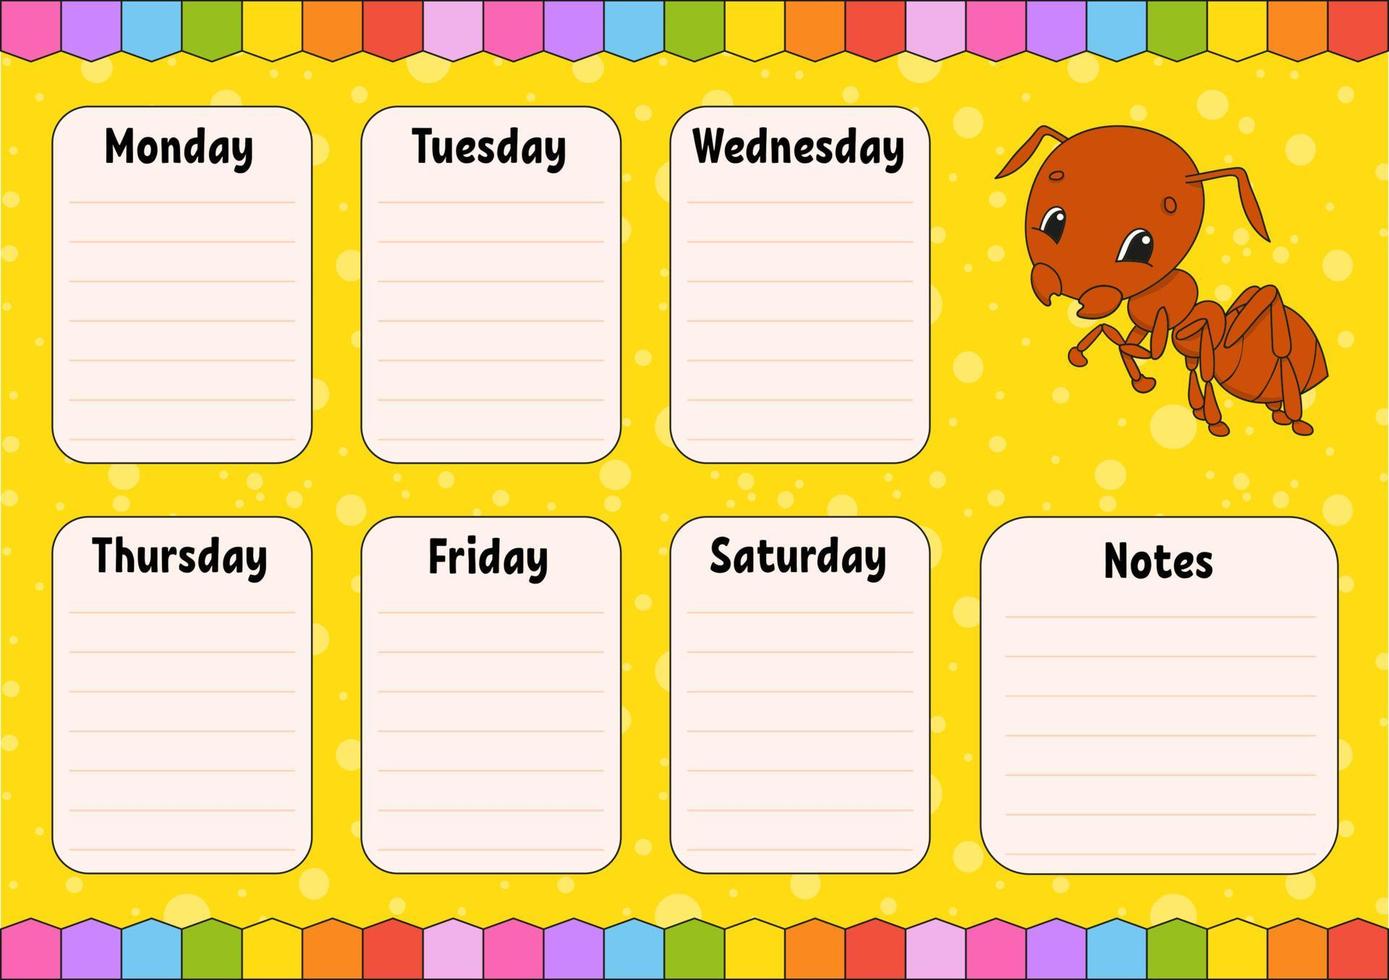 School schedule. Timetable for schoolboys. Empty template. Weekly planer with notes. Isolated color vector illustration. cartoon character.